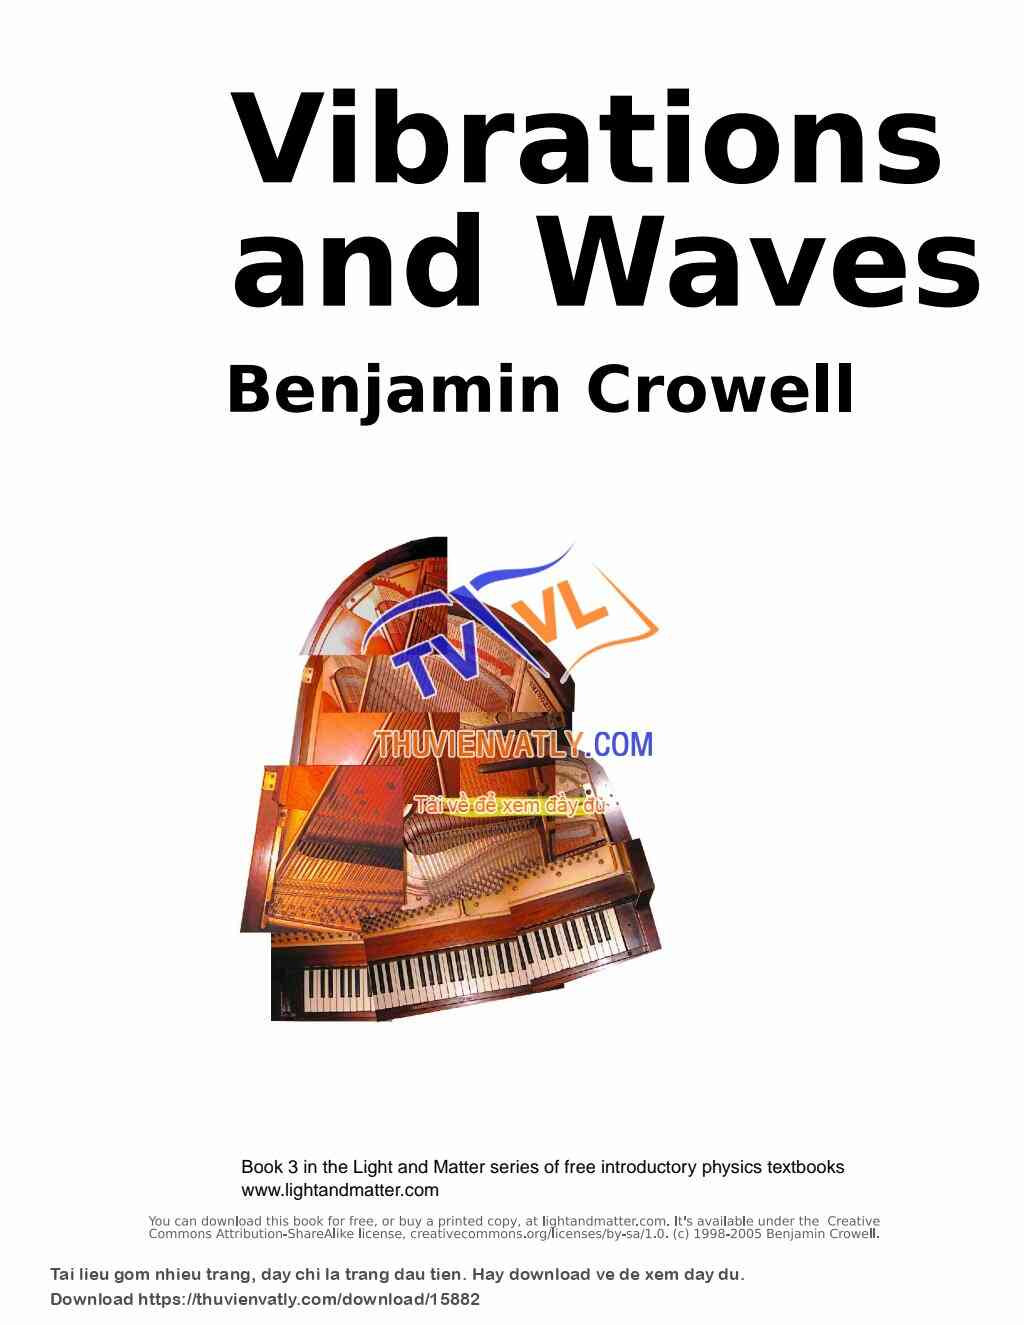 Vibrations and Waves - Benjamin Crowell